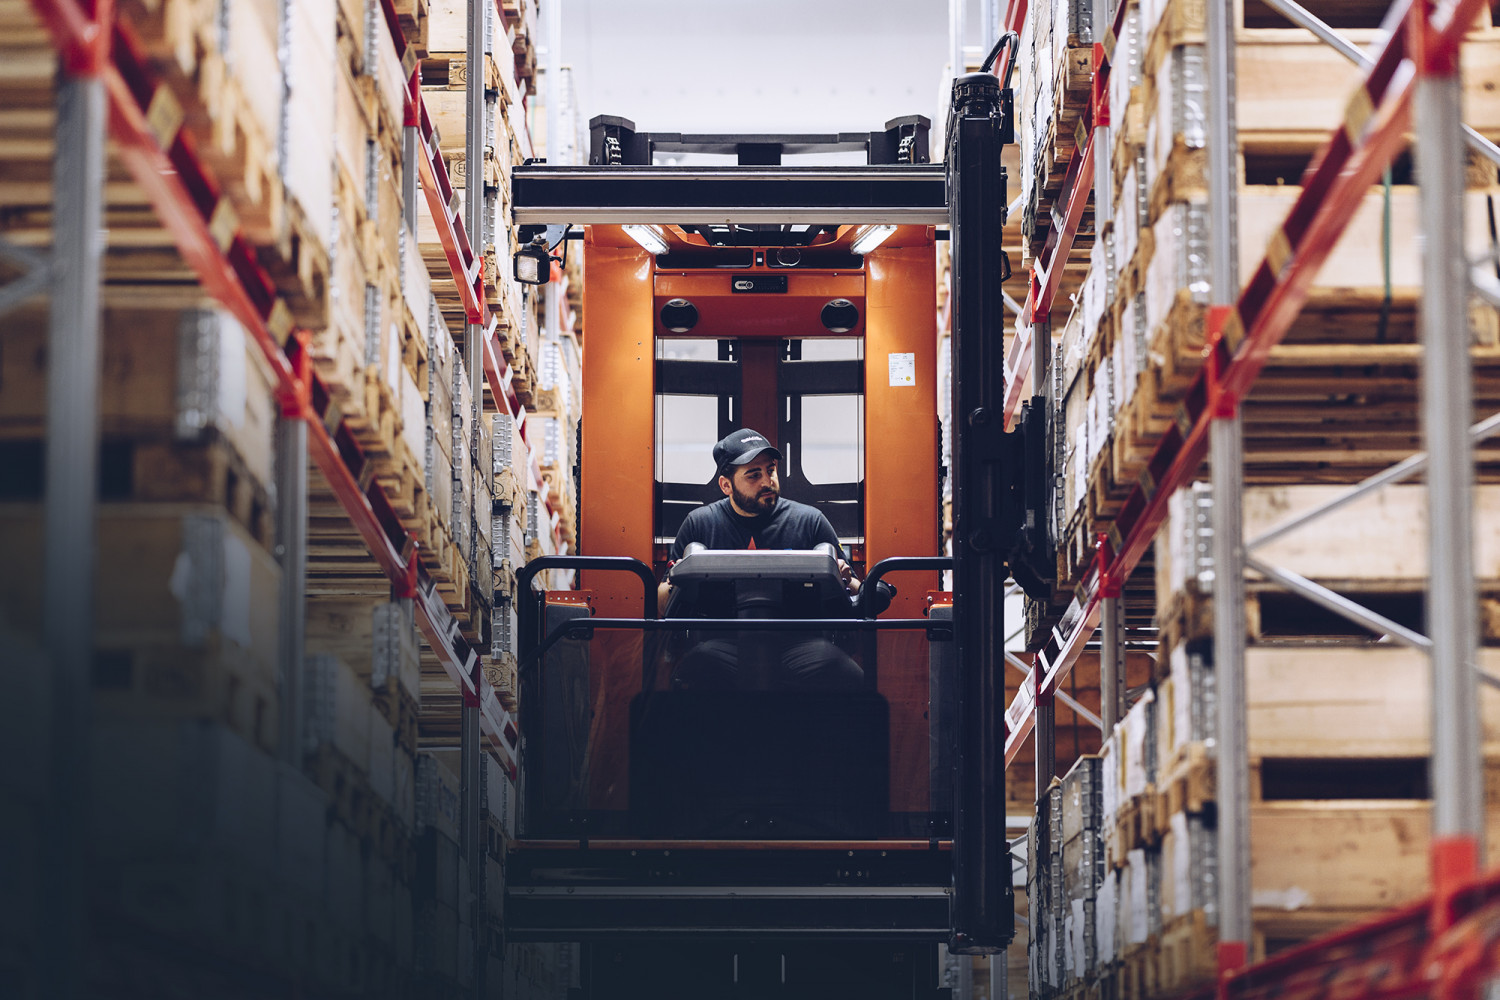 Large orange electric forklift truck in a warehouse, steered by a man with a cap